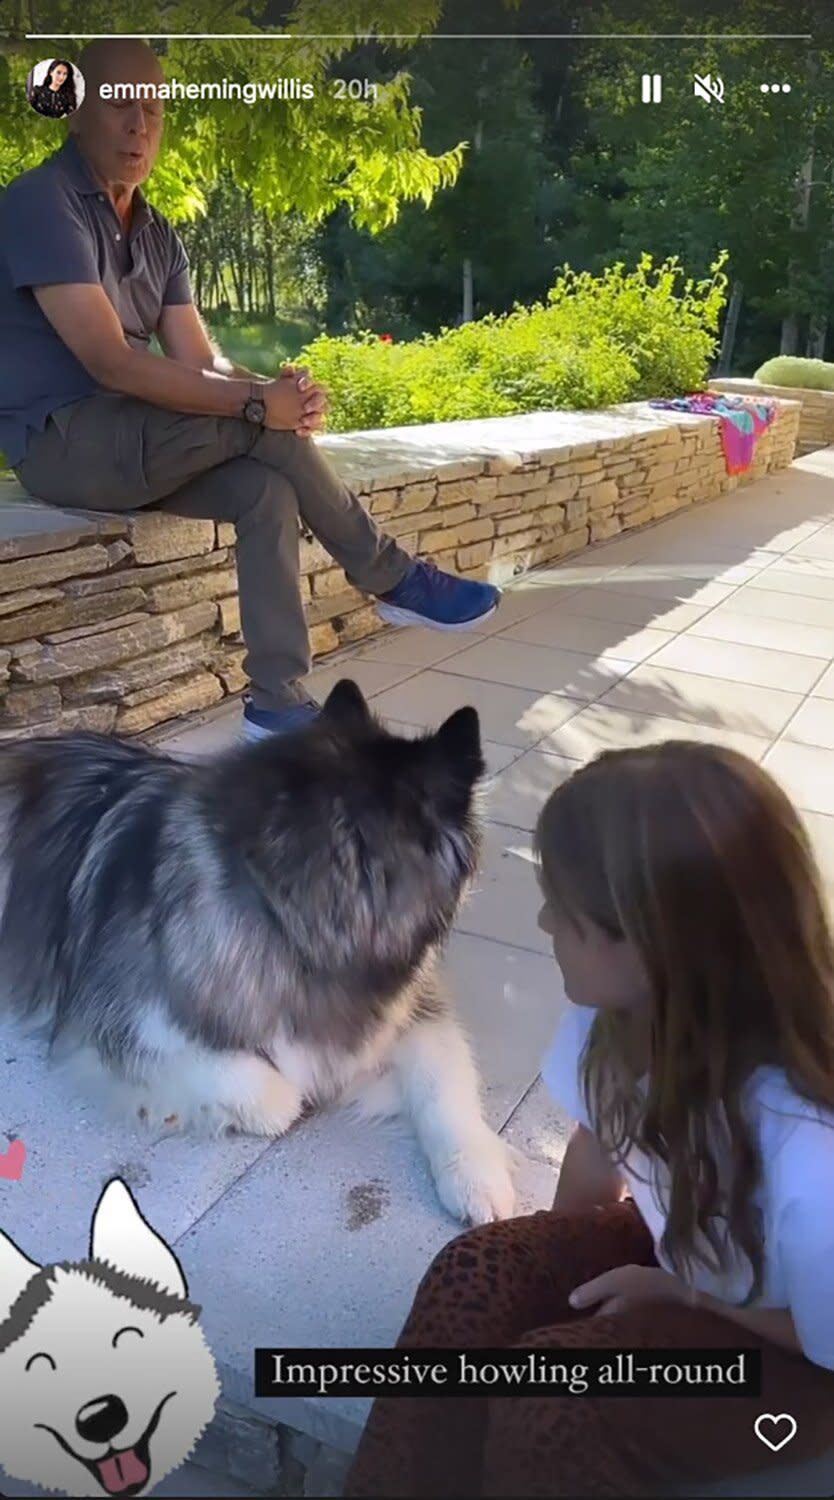 https://www.instagram.com/stories/emmahemingwillis/2869512650779519839/ — Bruce Willis Shows Off His 'Impressive' Howling Skills with Daughter Evelyn and Their Dog